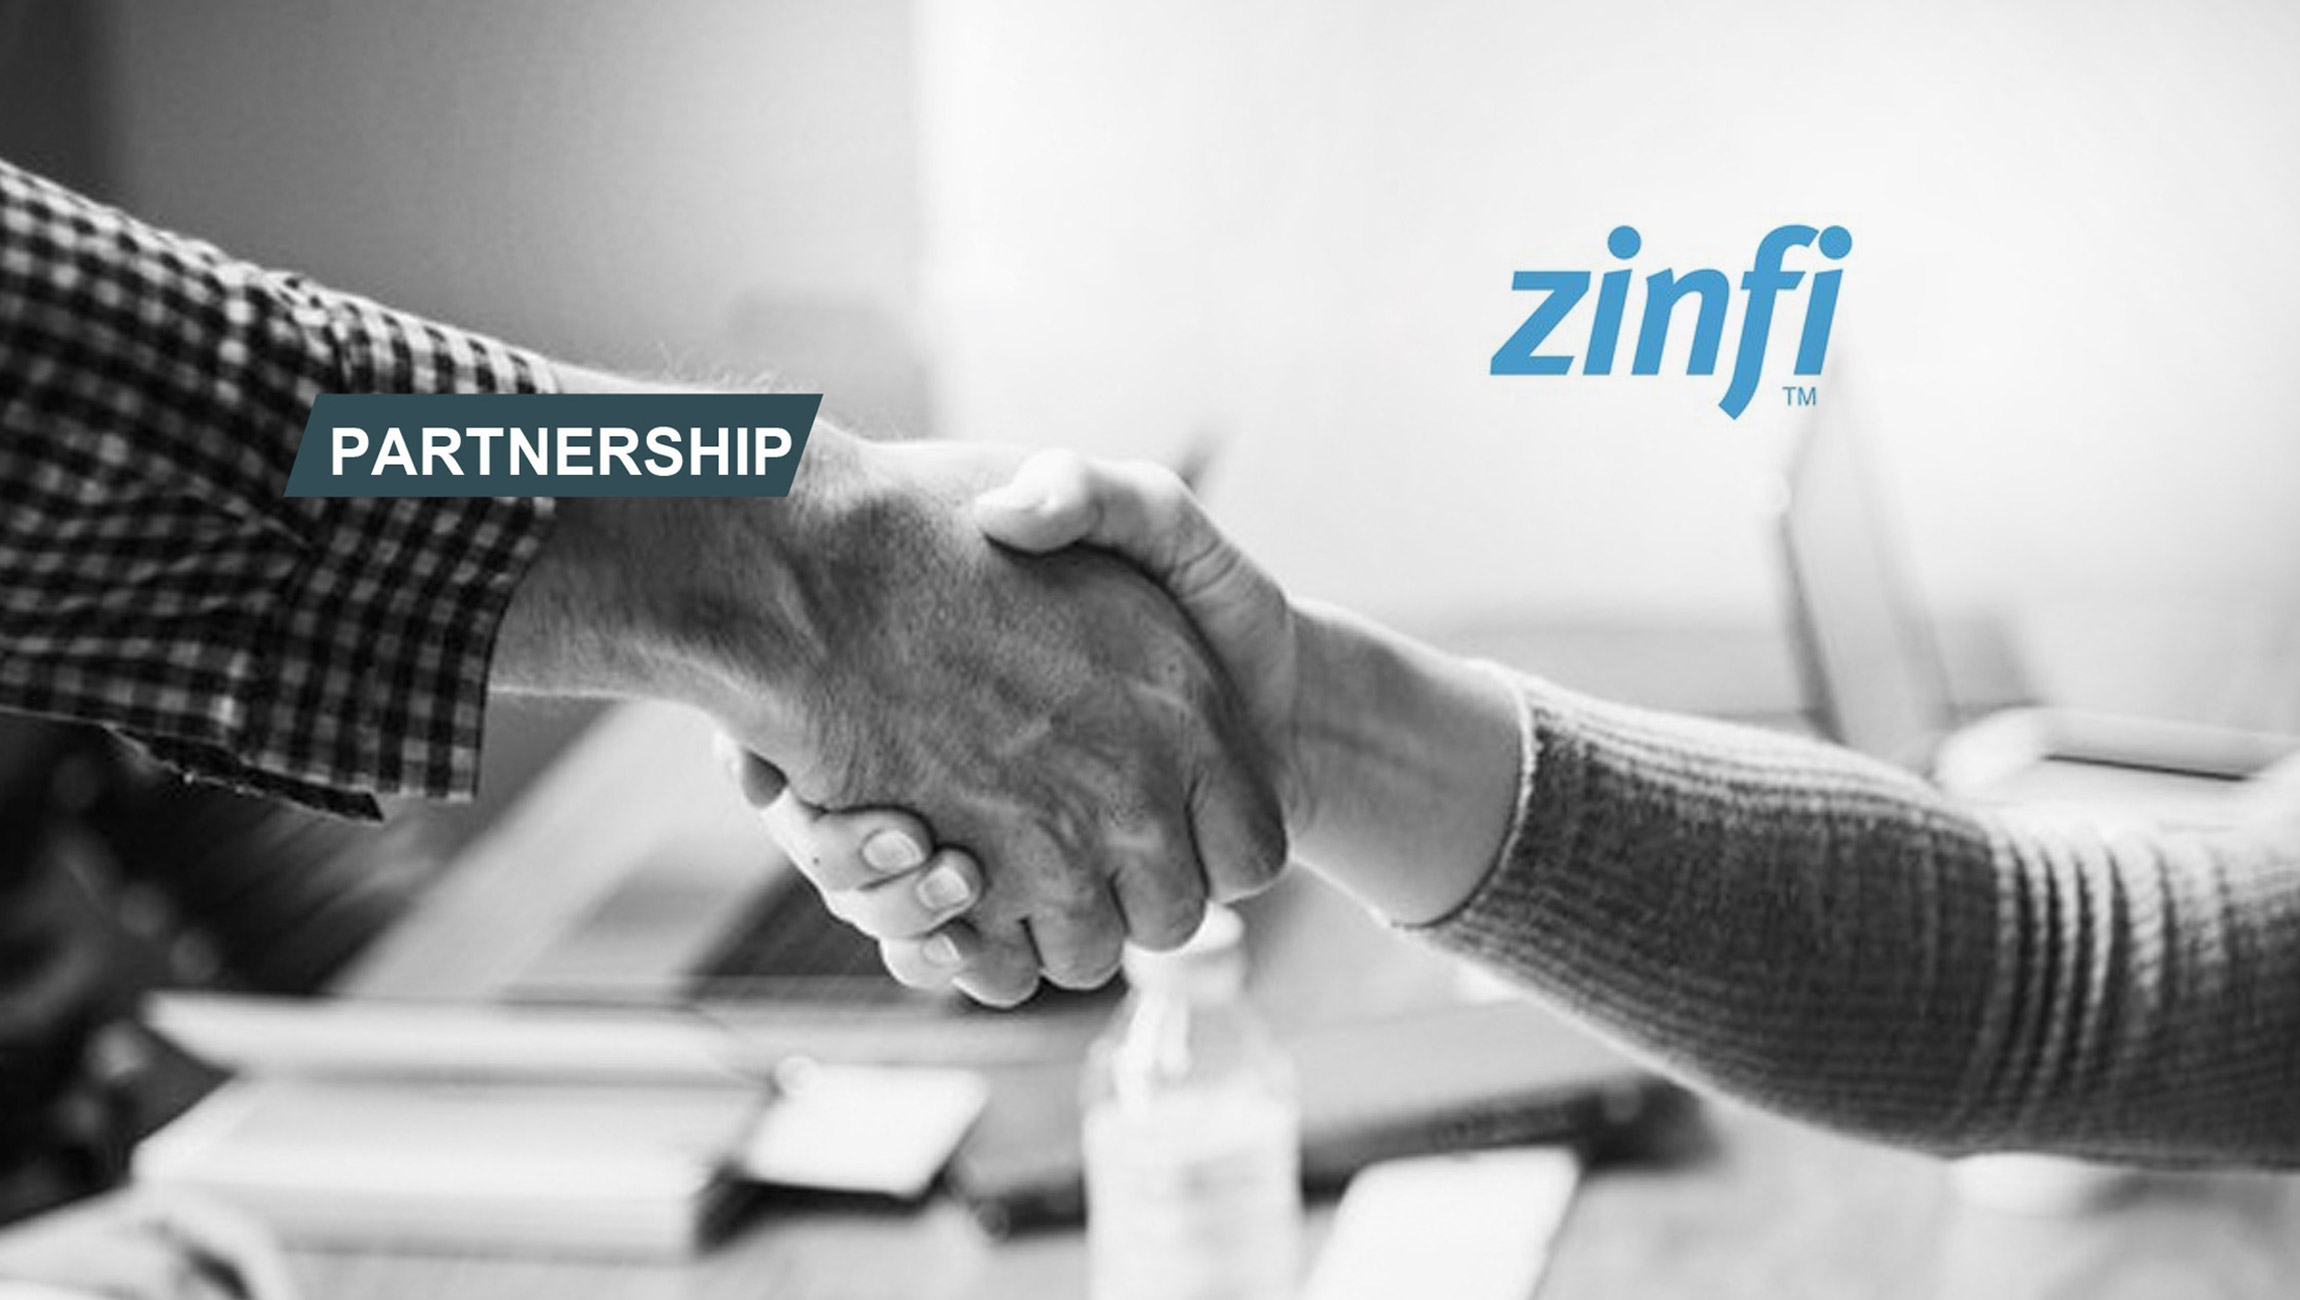 ZINIFI-Partner-Relationship-Management-Software-Includes-Integration-with-HubSpot-CRM-Data_-Allowing-Beamex-to-Automate-Lead-Management-in-Its-Partner-Network-and-Track-MQLs-through-the-Sales-Funnel